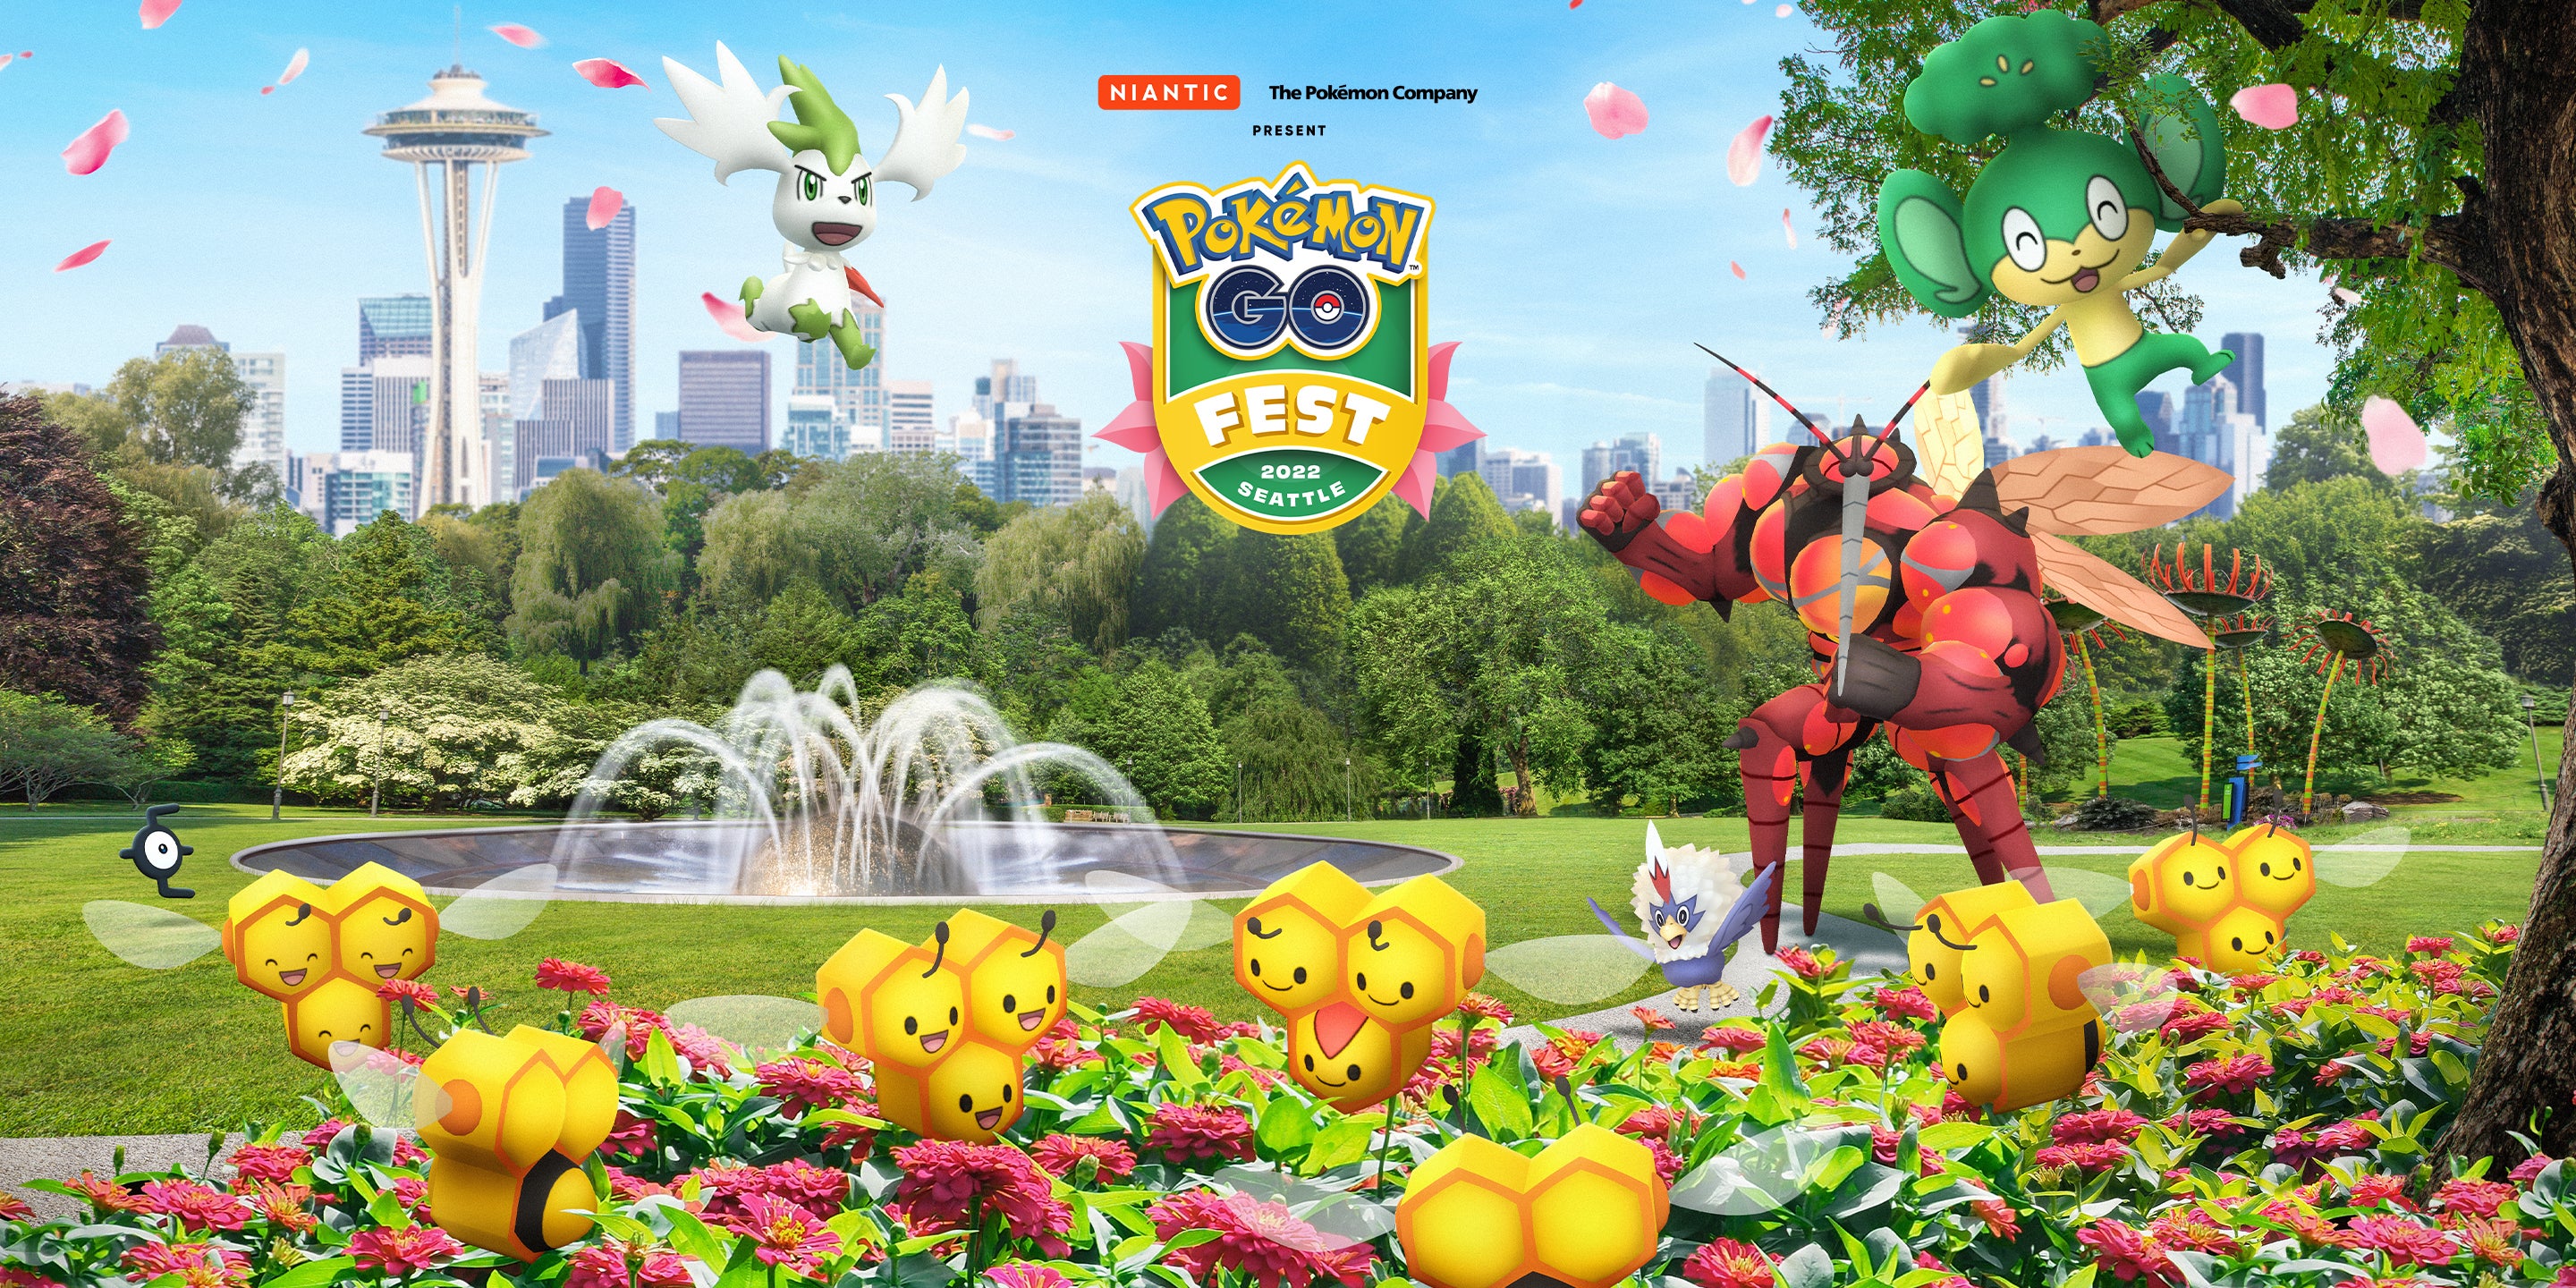 Buzzwole, Combee and Shaymin frolic in a fountain at Pokemon Go Fest 2022 in Seattle